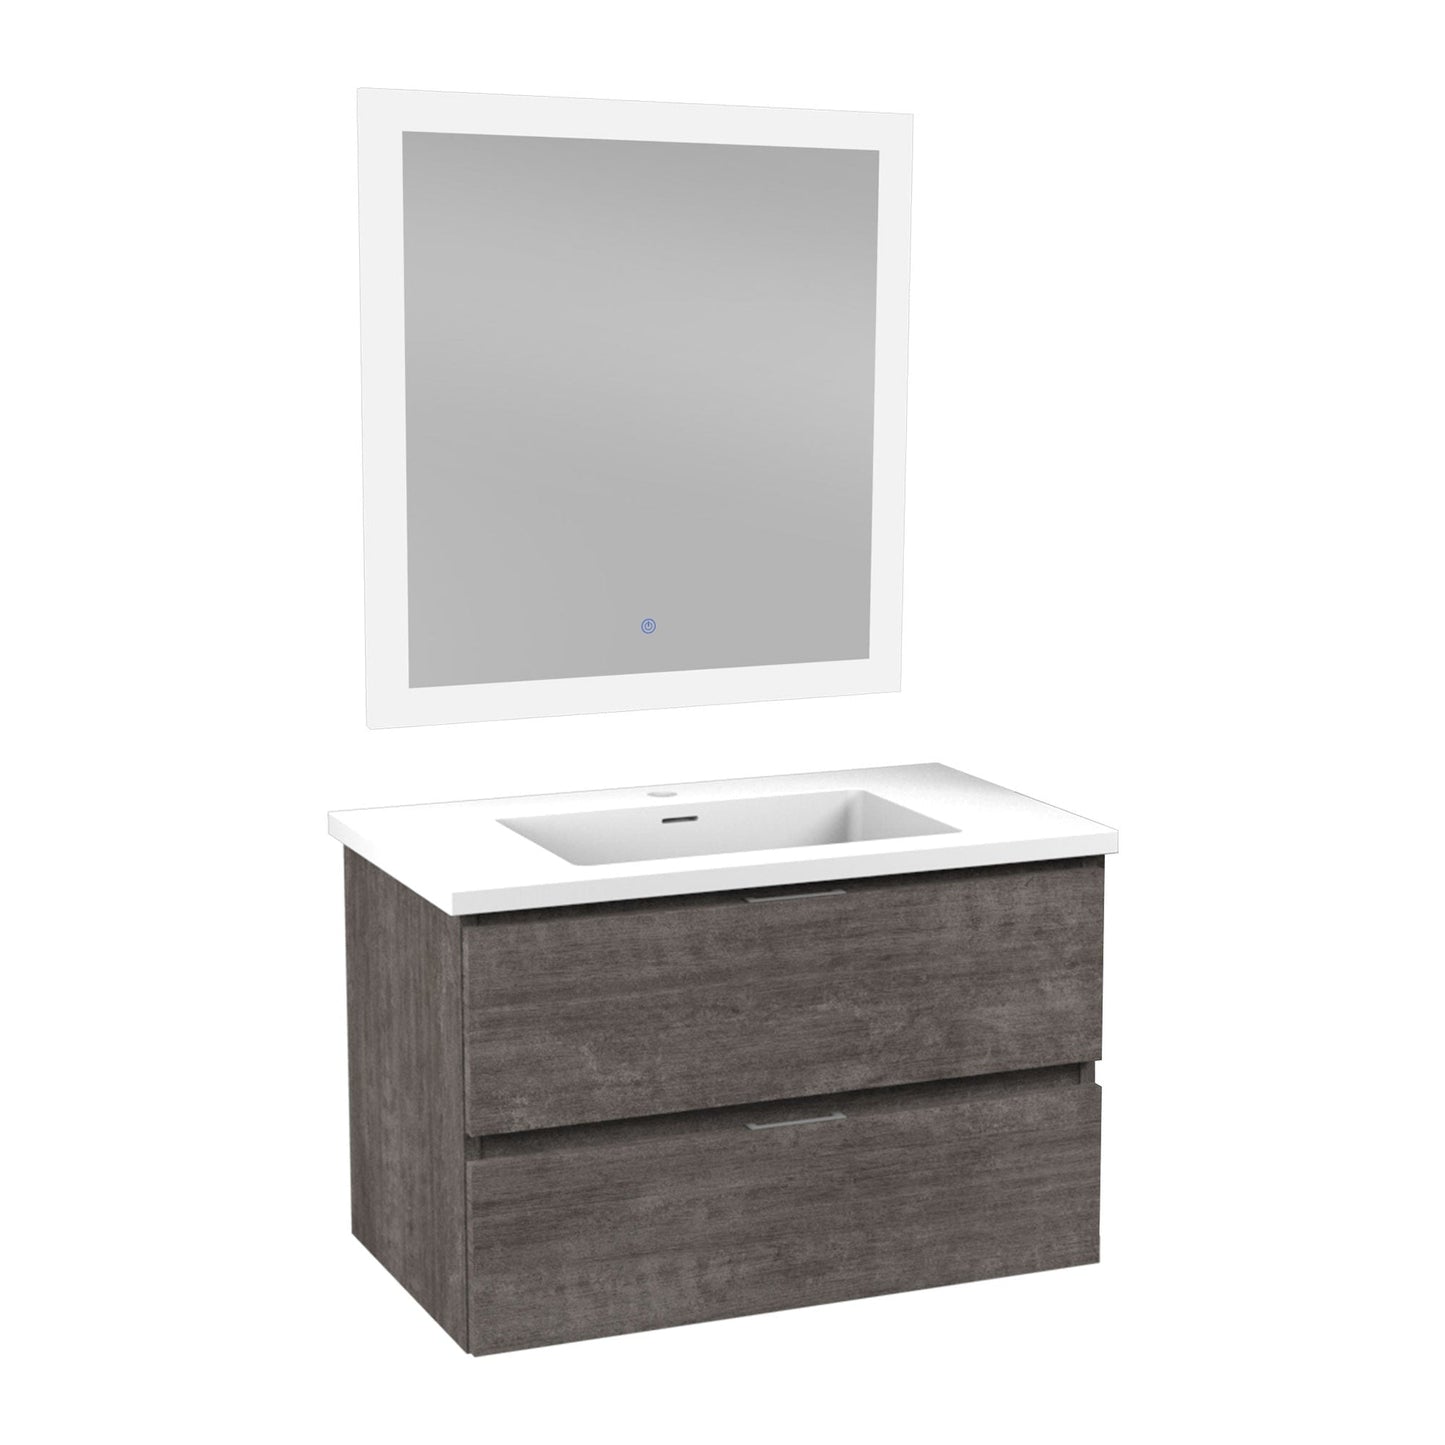 ANZZI Conques Series 30" x 20" Rich Gray Solid Wood Bathroom Vanity With Glossy White Countertop With Sink and 30" LED Mirror